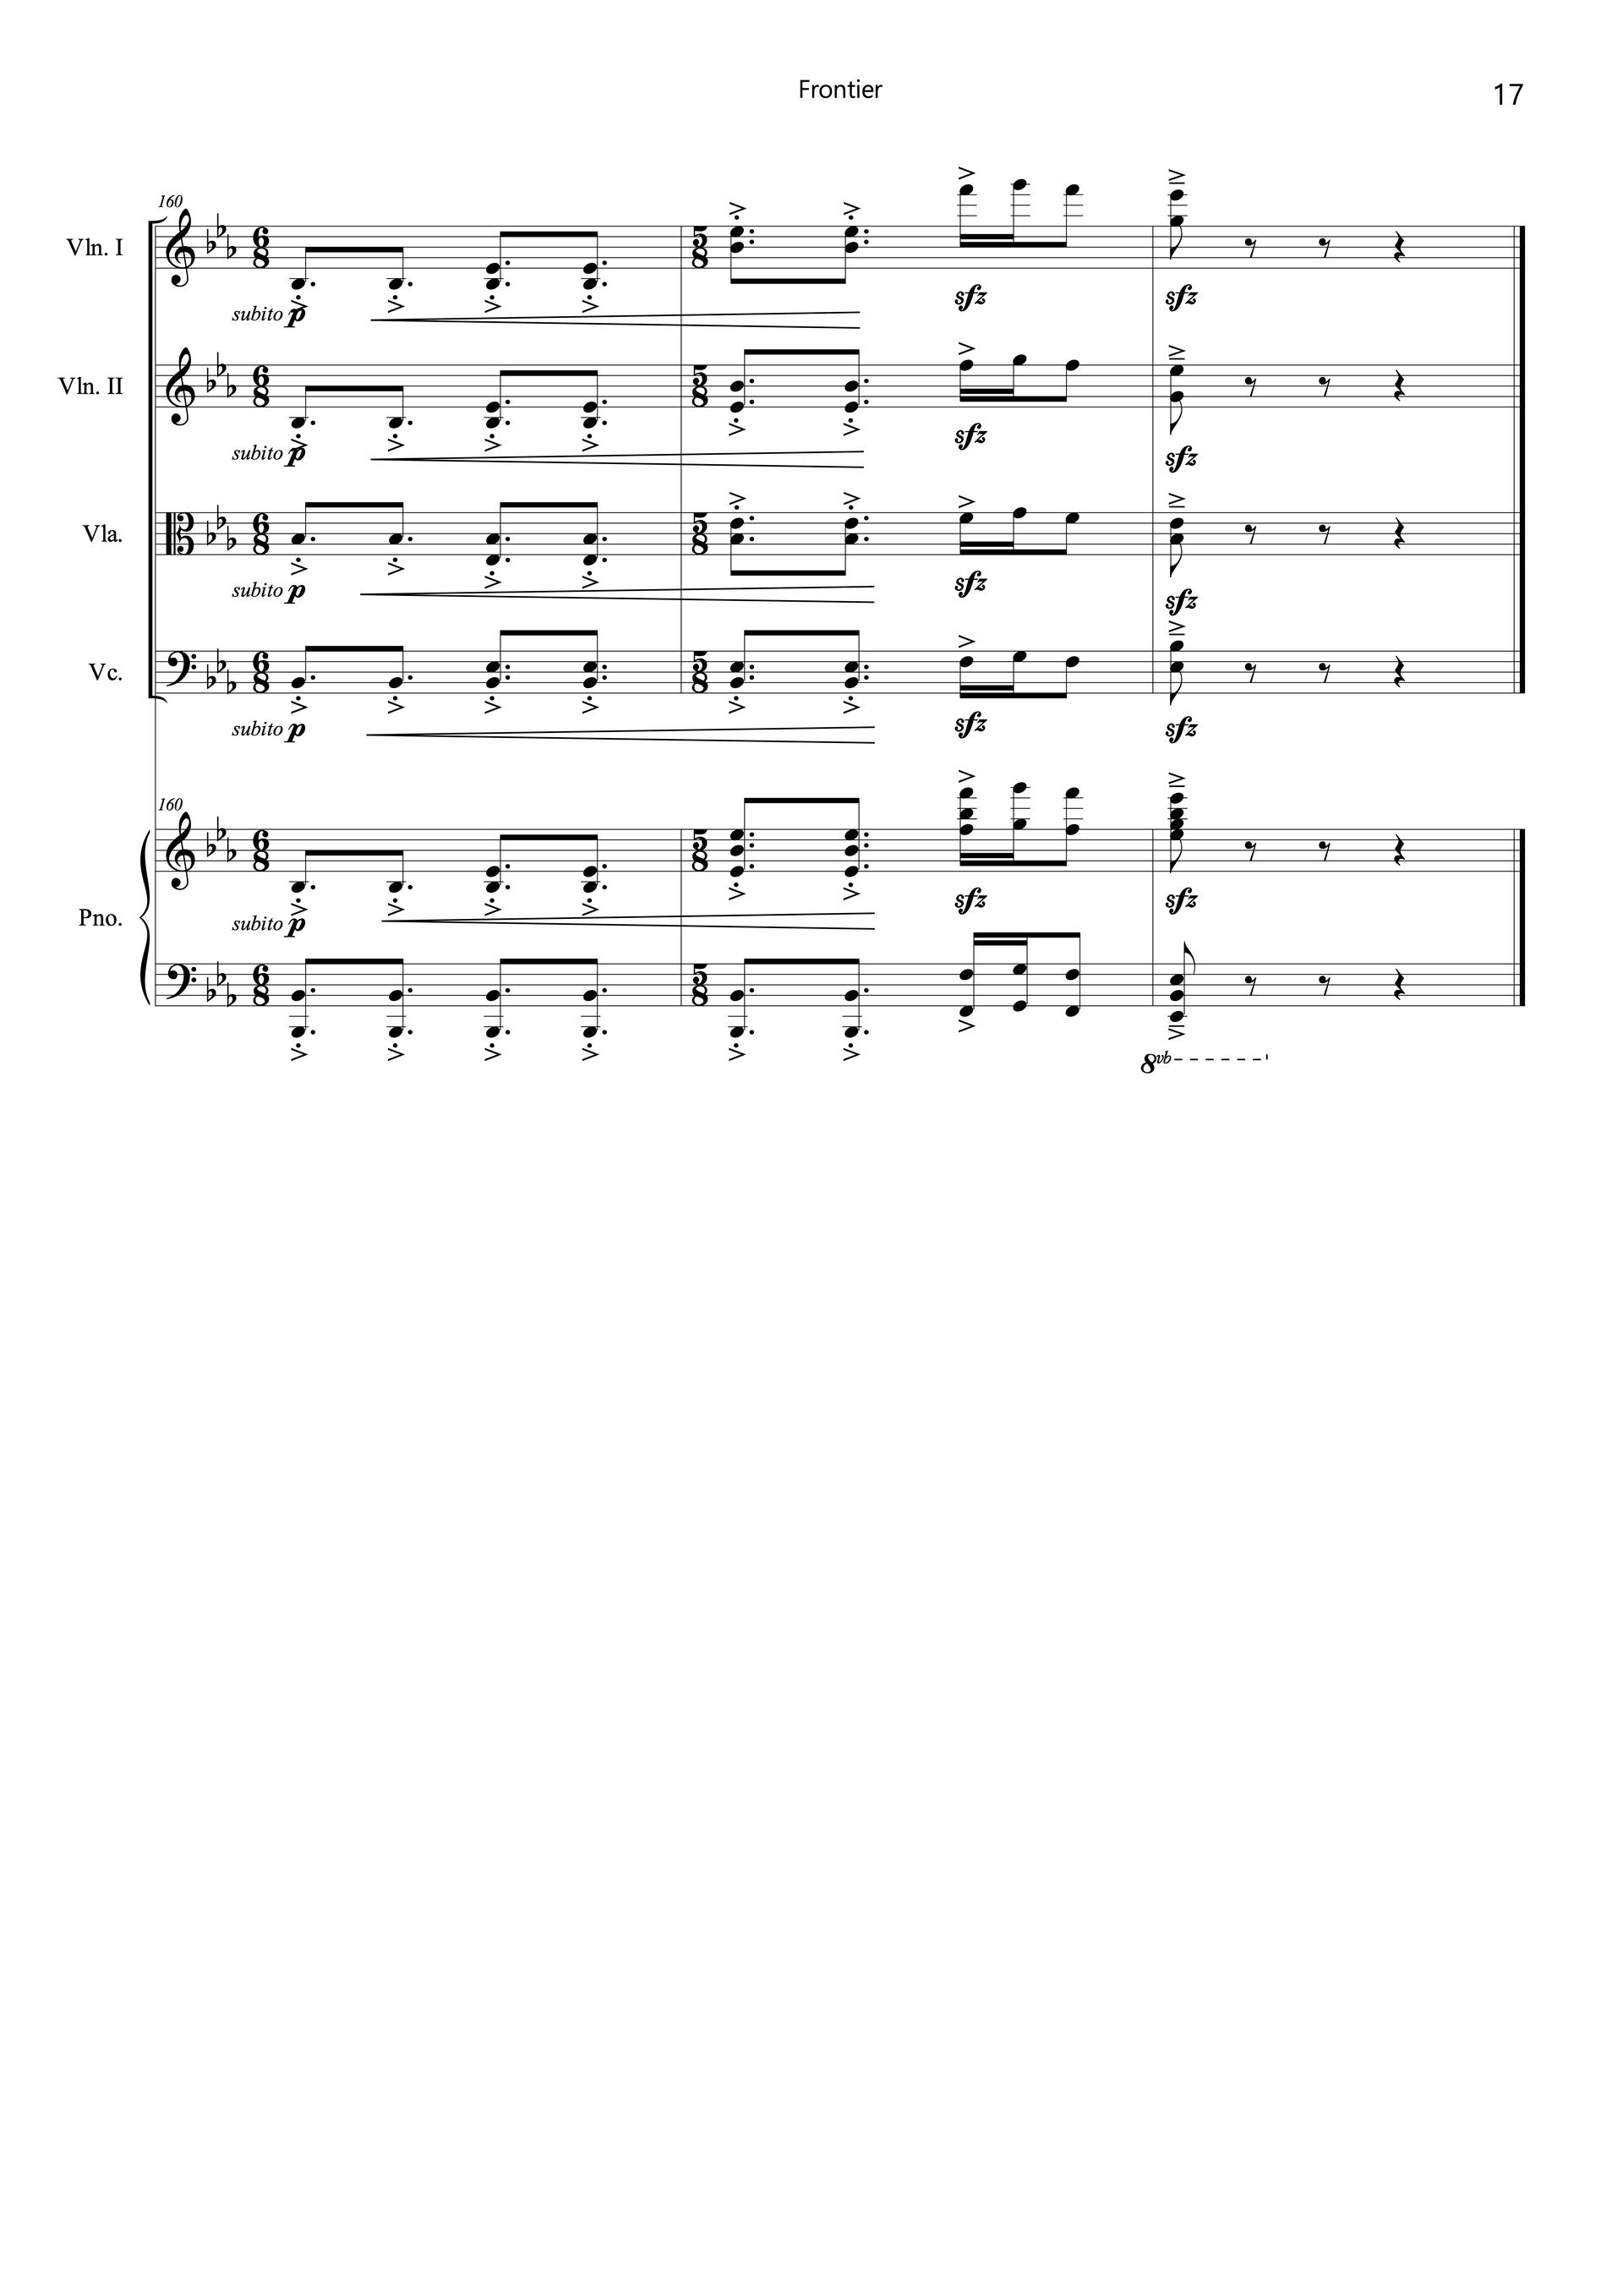 Sheet music of Frontier arranged for violins, viola, cello and piano quintet preview page 17